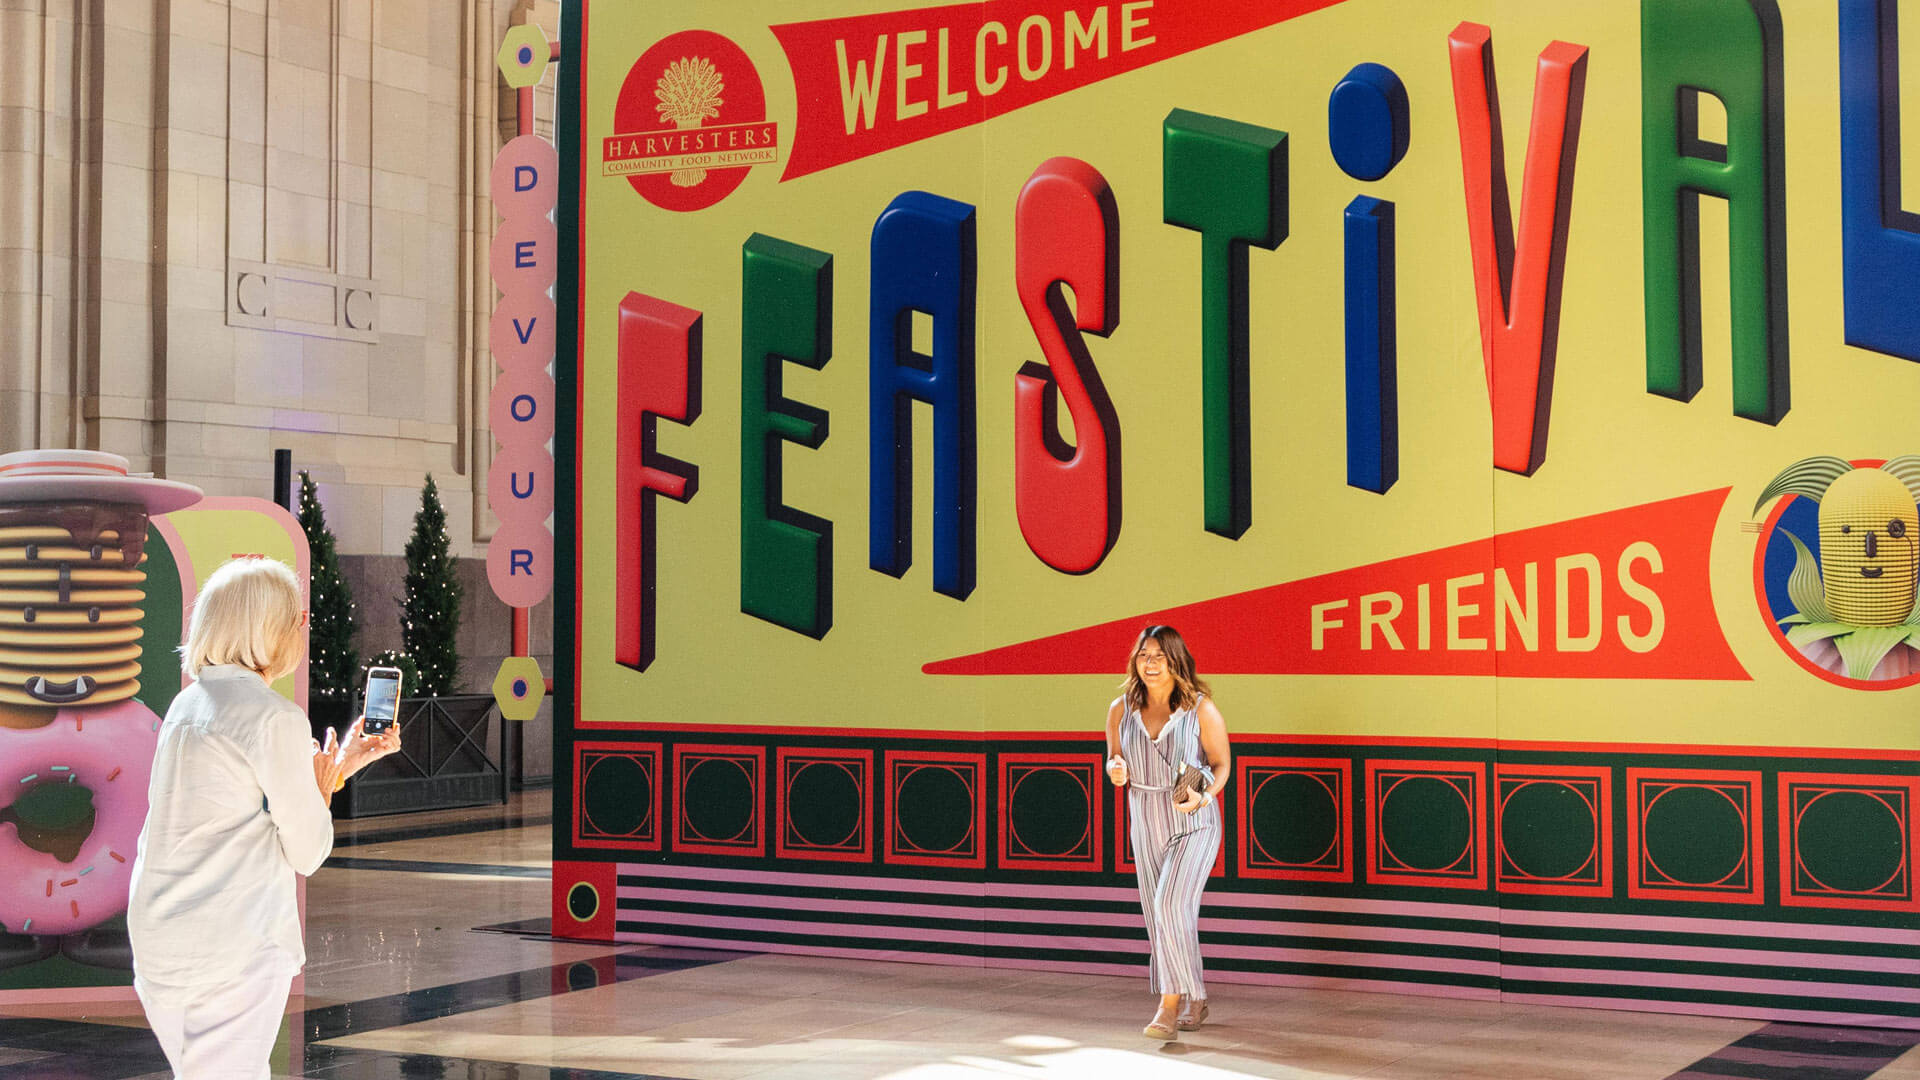 Woman laughing while getting her photo taken in front of giant Welcome Feastival Friends sign at the event.